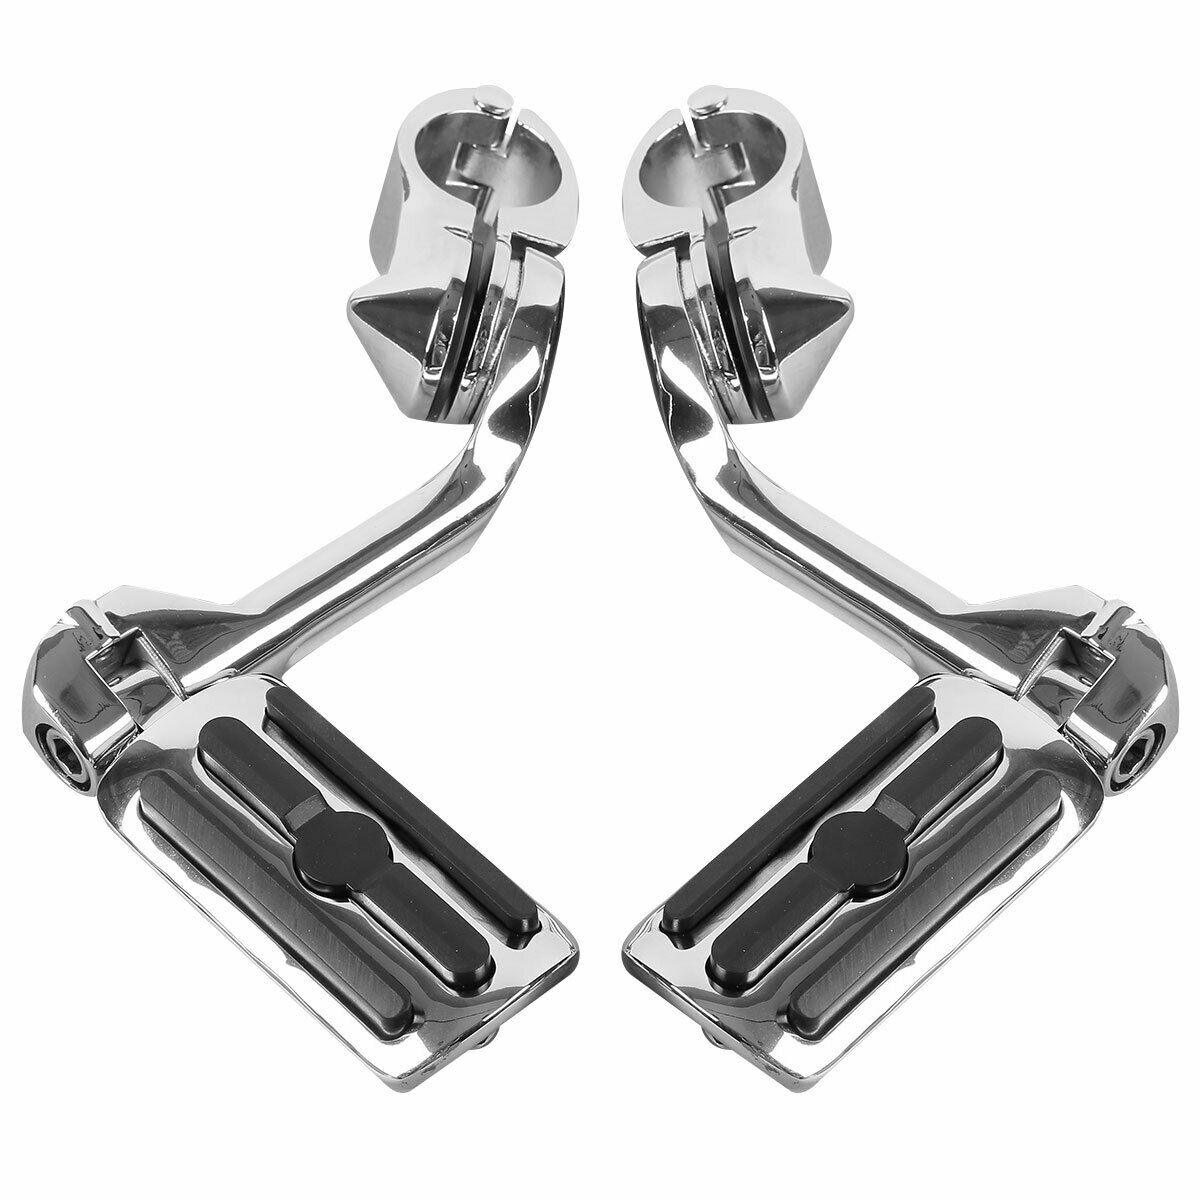 Mustache Engine Guard Crash Bar Footpegs Fit For Harley Softail Deluxe 2000-2017 - Moto Life Products